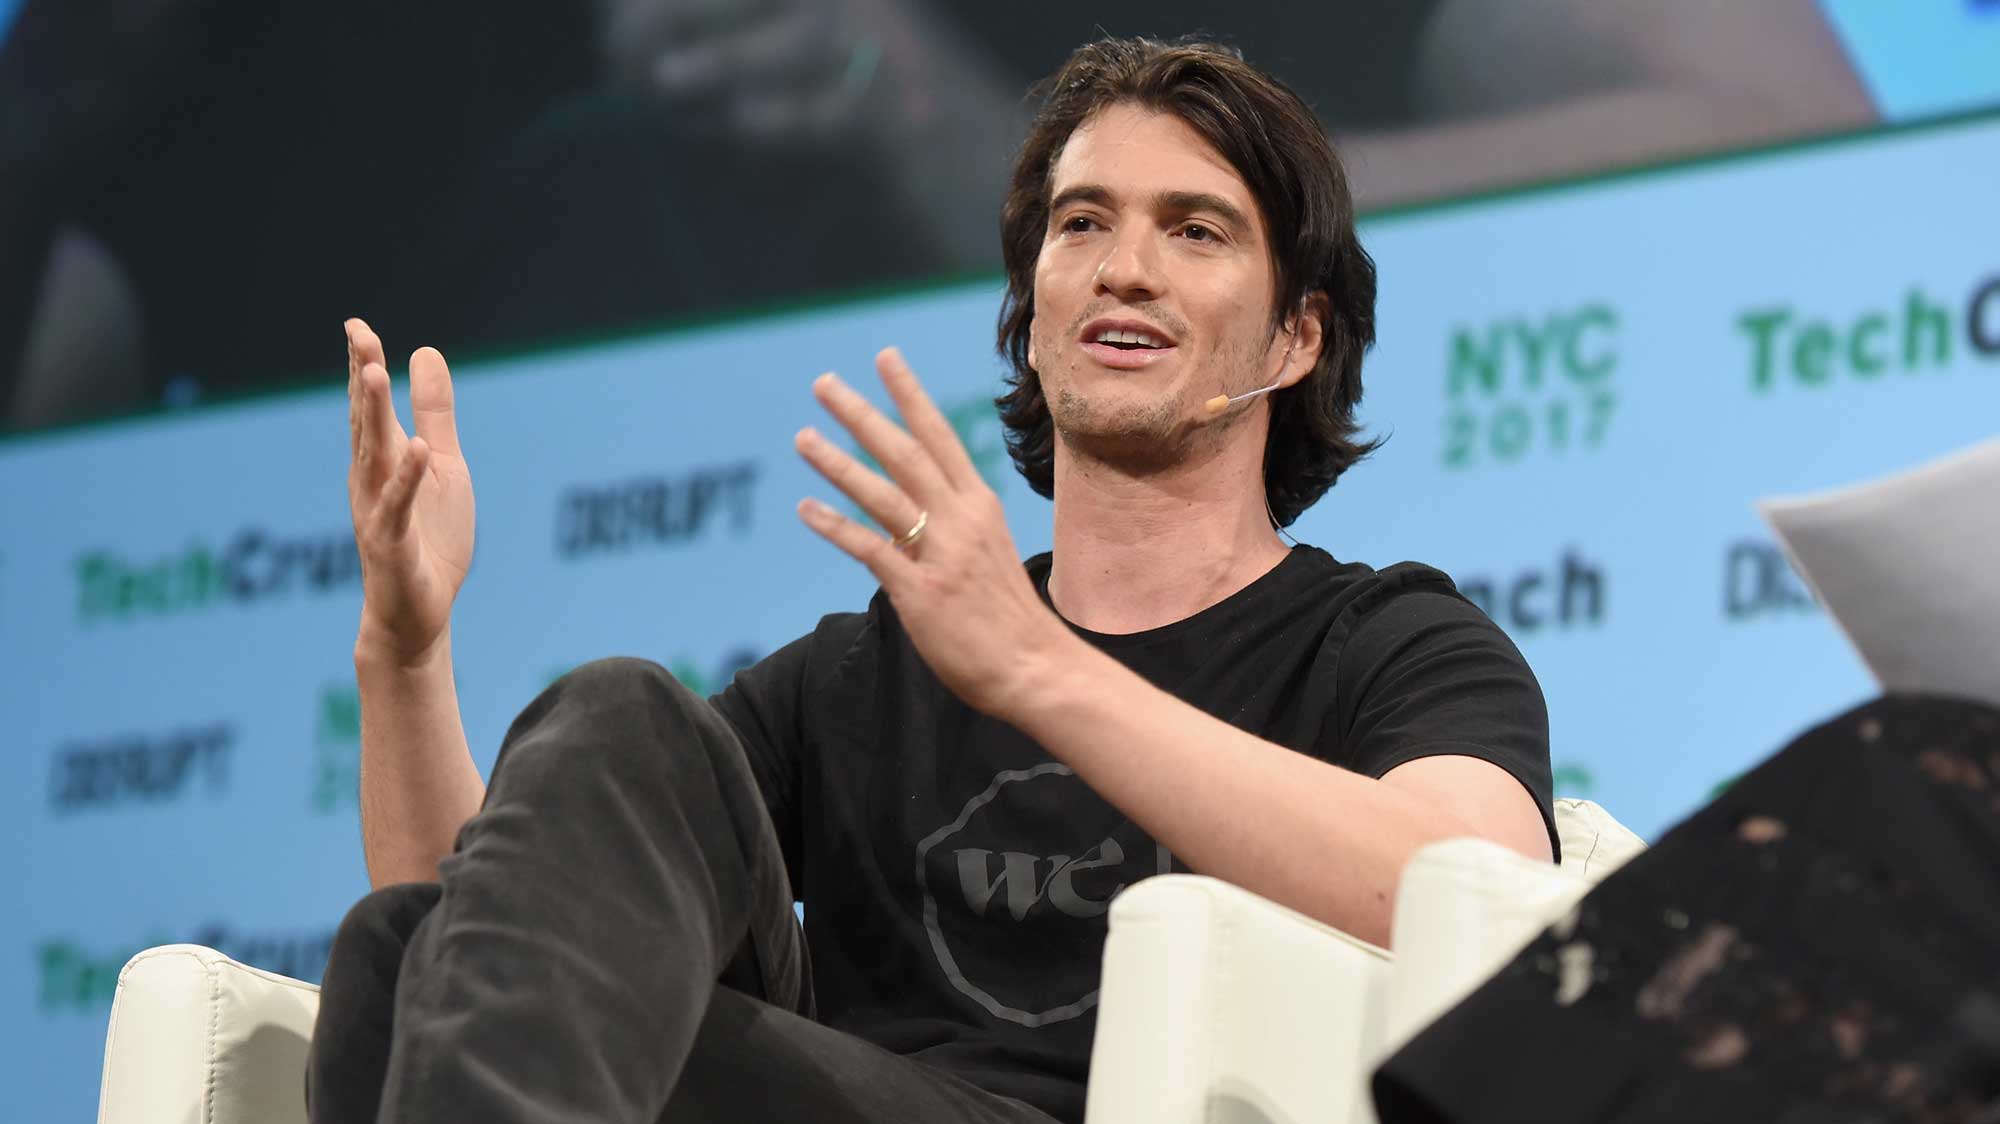 WeWork is starting a $3 billion fund to buy stakes in buildings